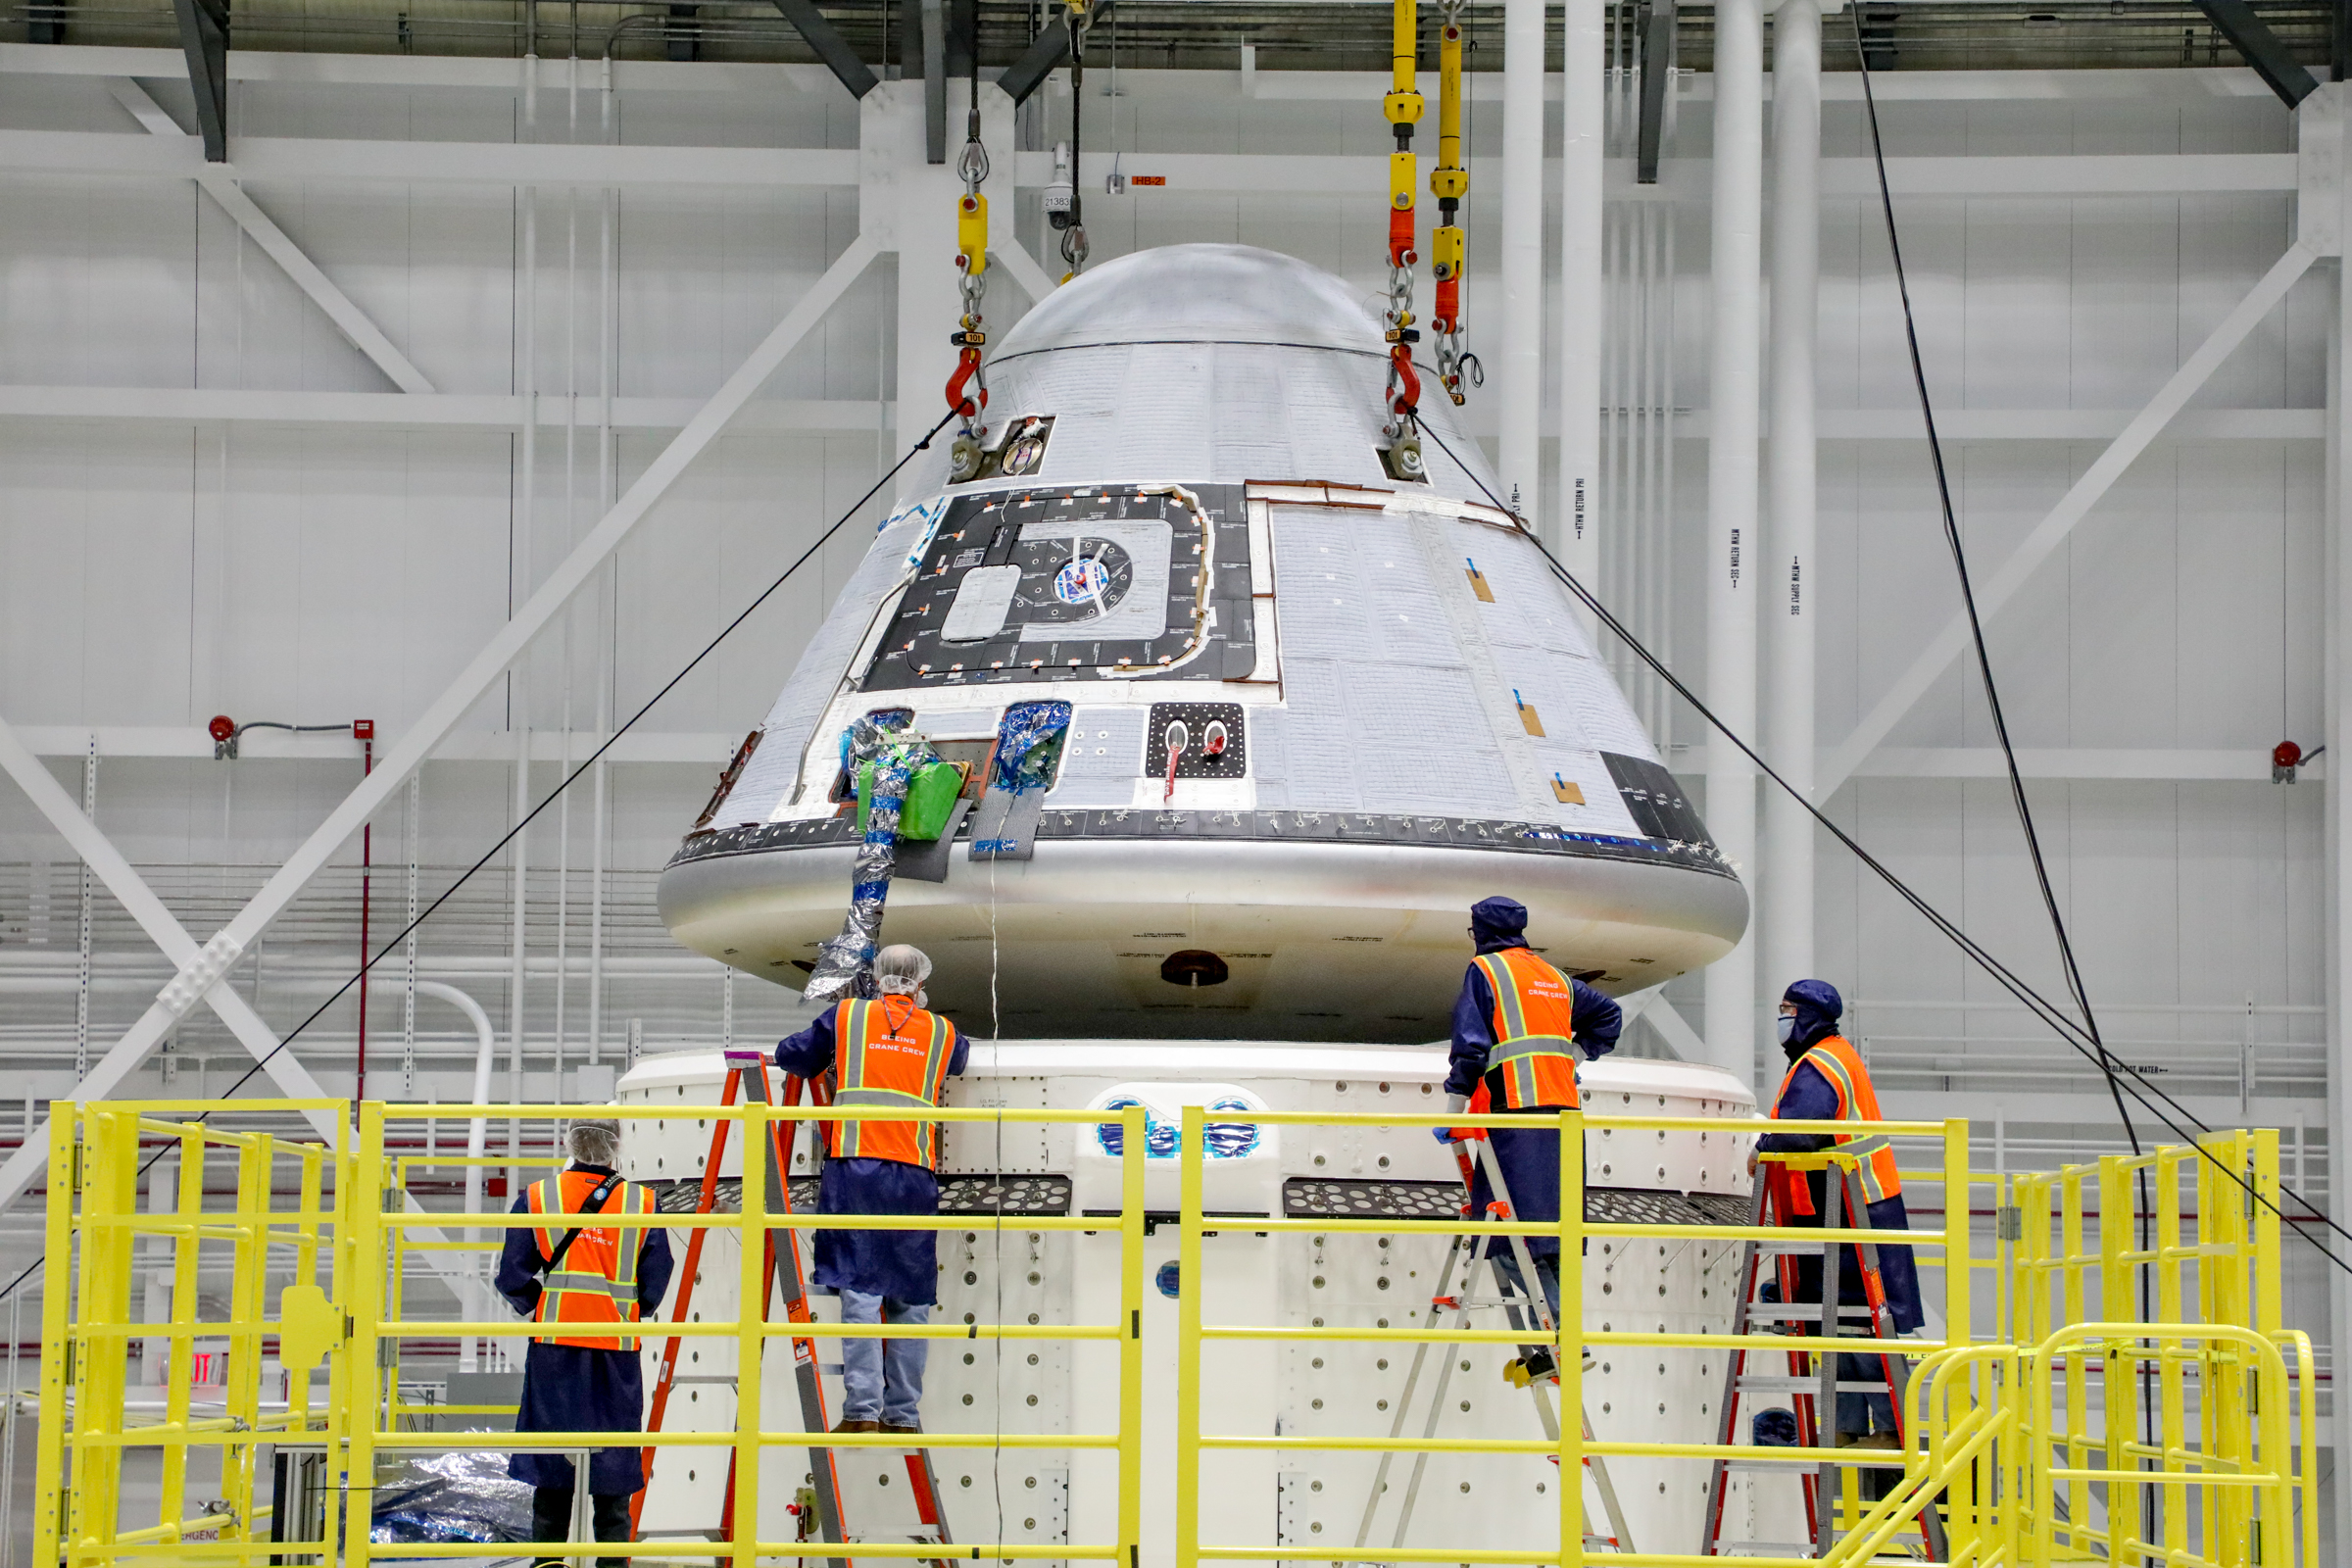 Technicians observe Boeing's Starliner crew module being placed on top of the service module in the Commercial Crew and Cargo Processing Facility at NASA's Kennedy Space Center in Florida on Jan. 14, 2021.